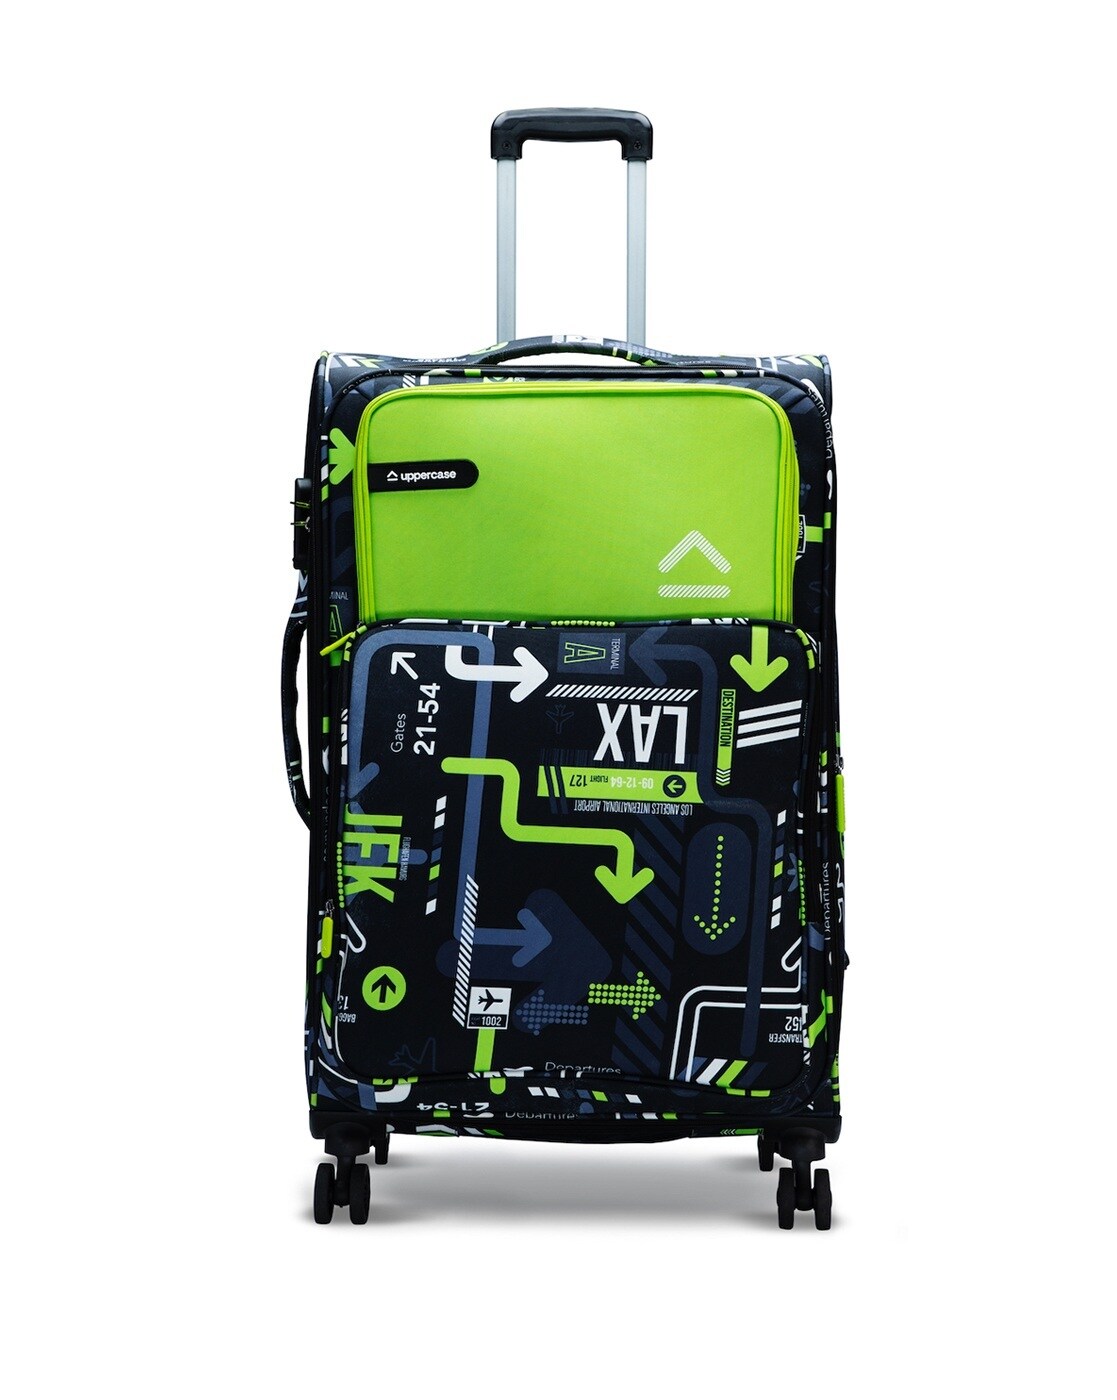 VIP luggage trolley bag new model with new offer exchange offer  international trolley bag  YouTube